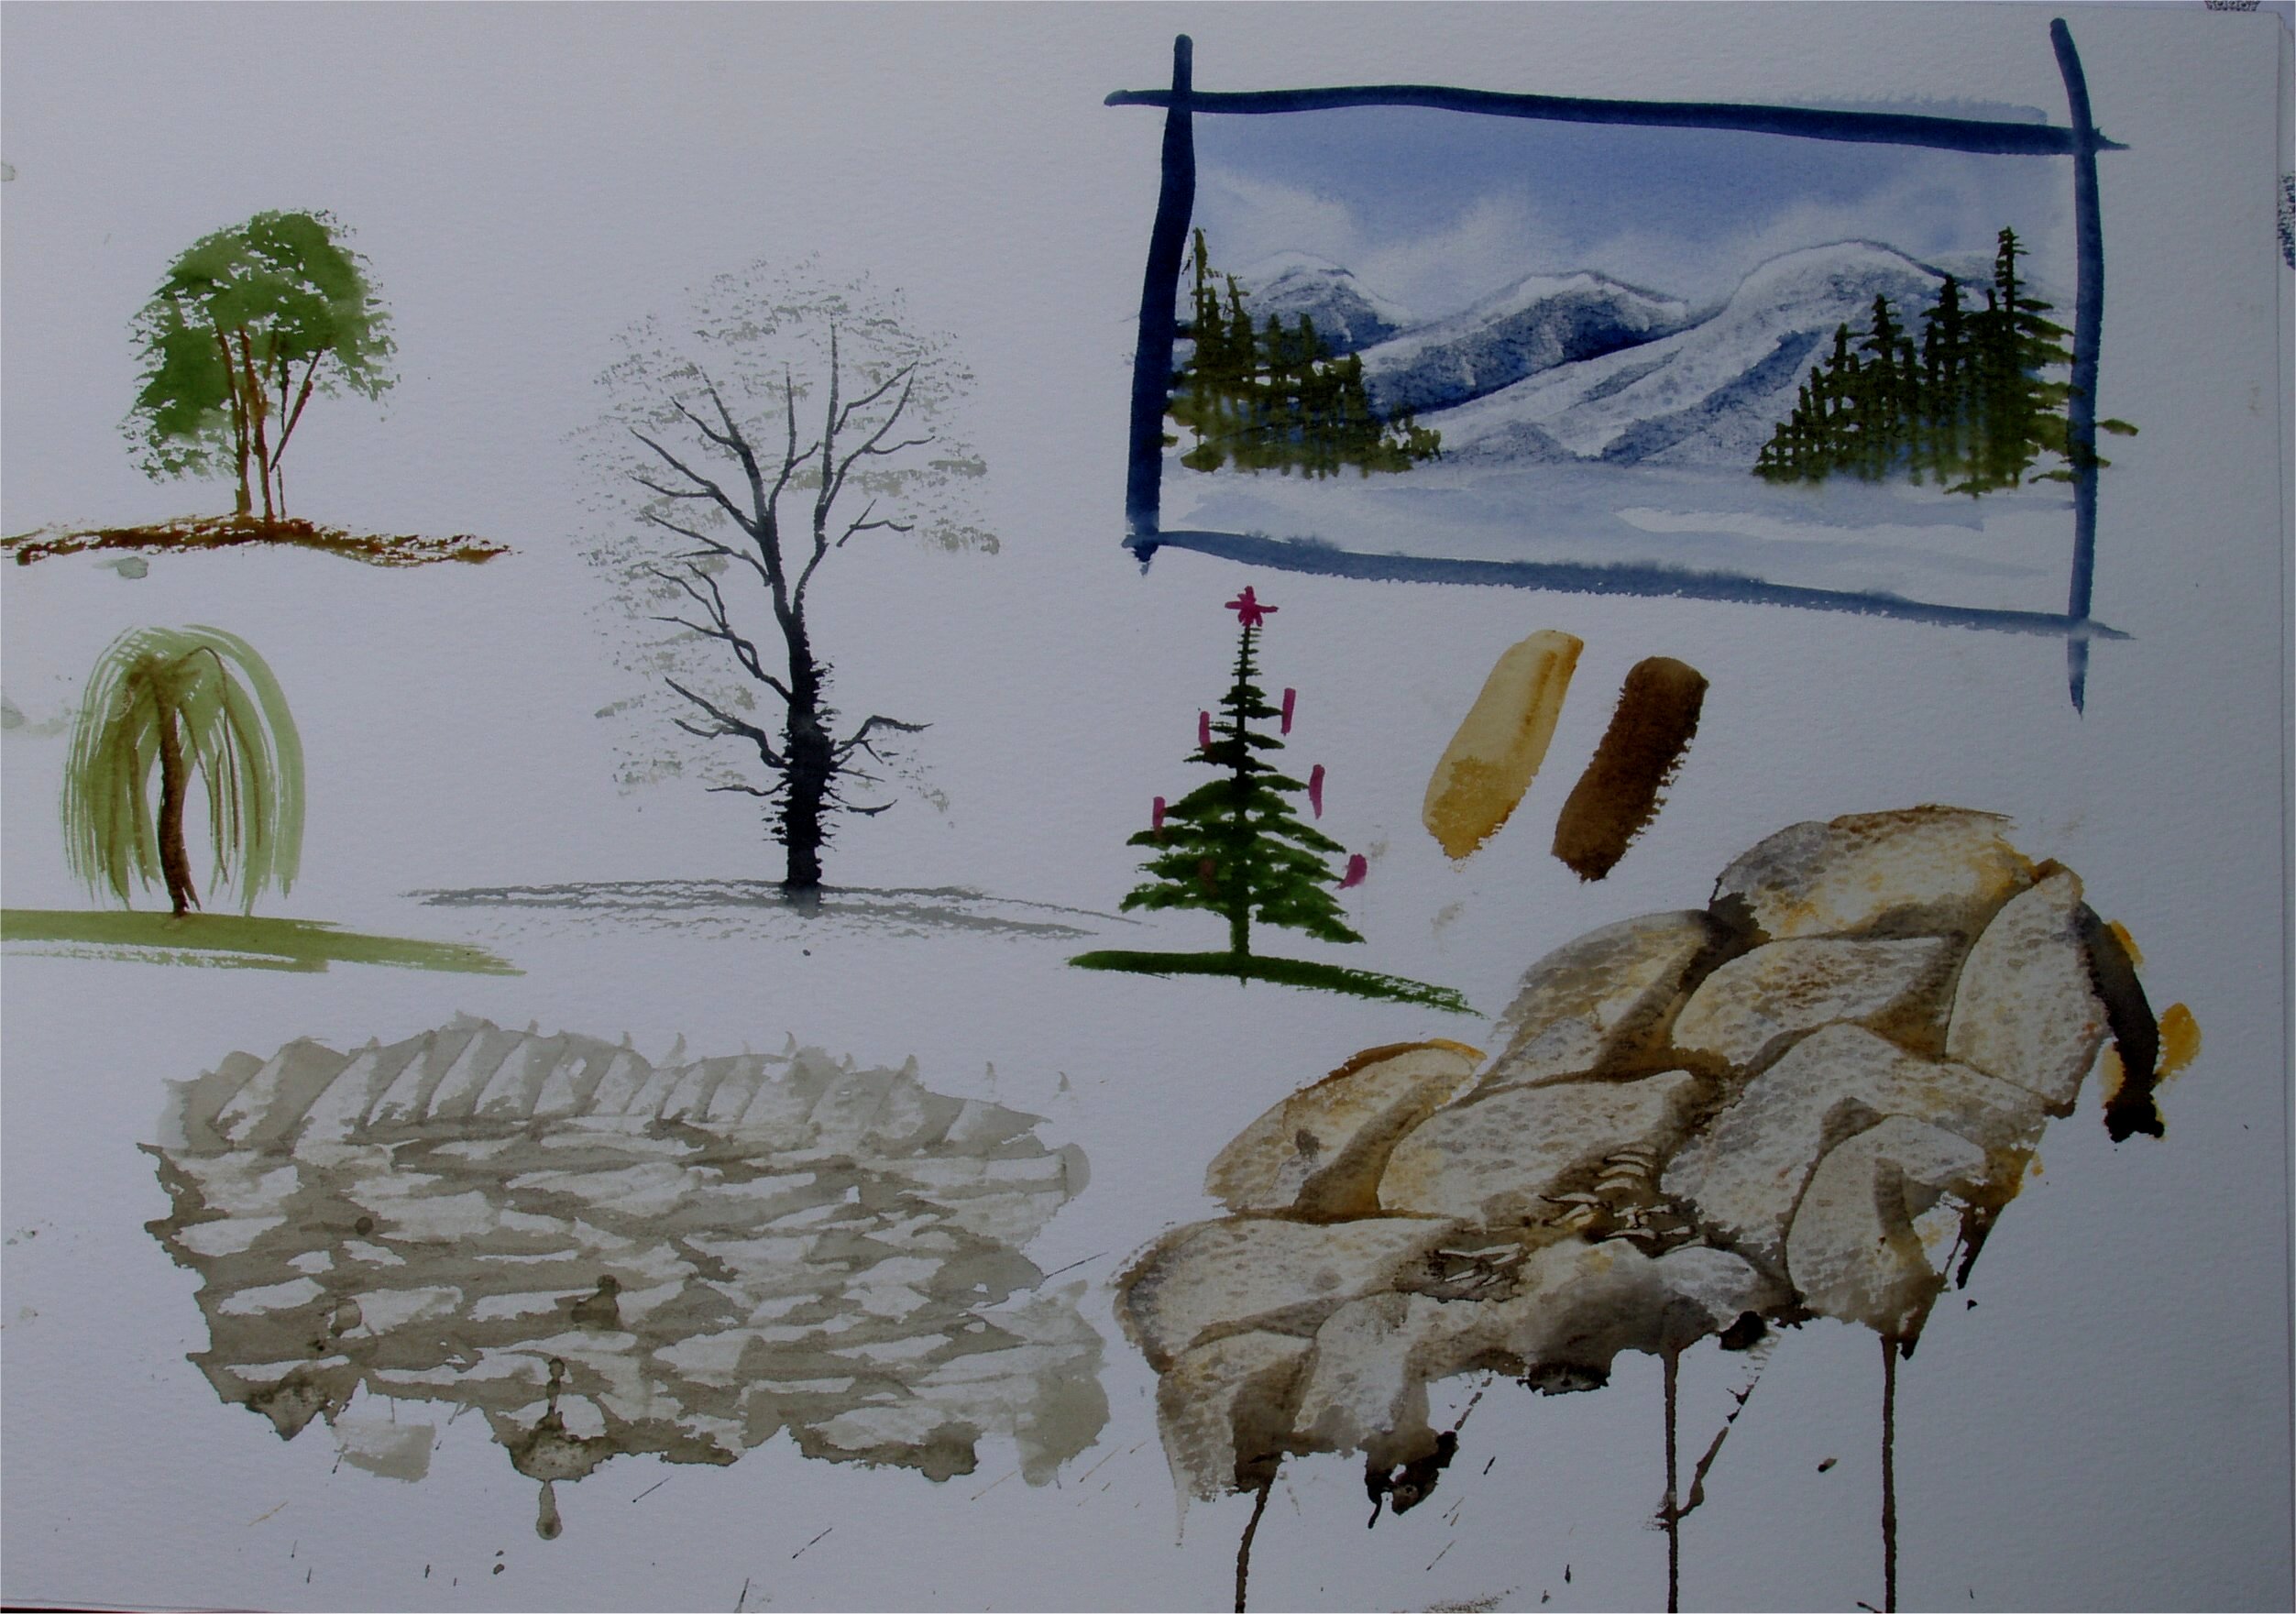 How to paint trees, rocks and mountains